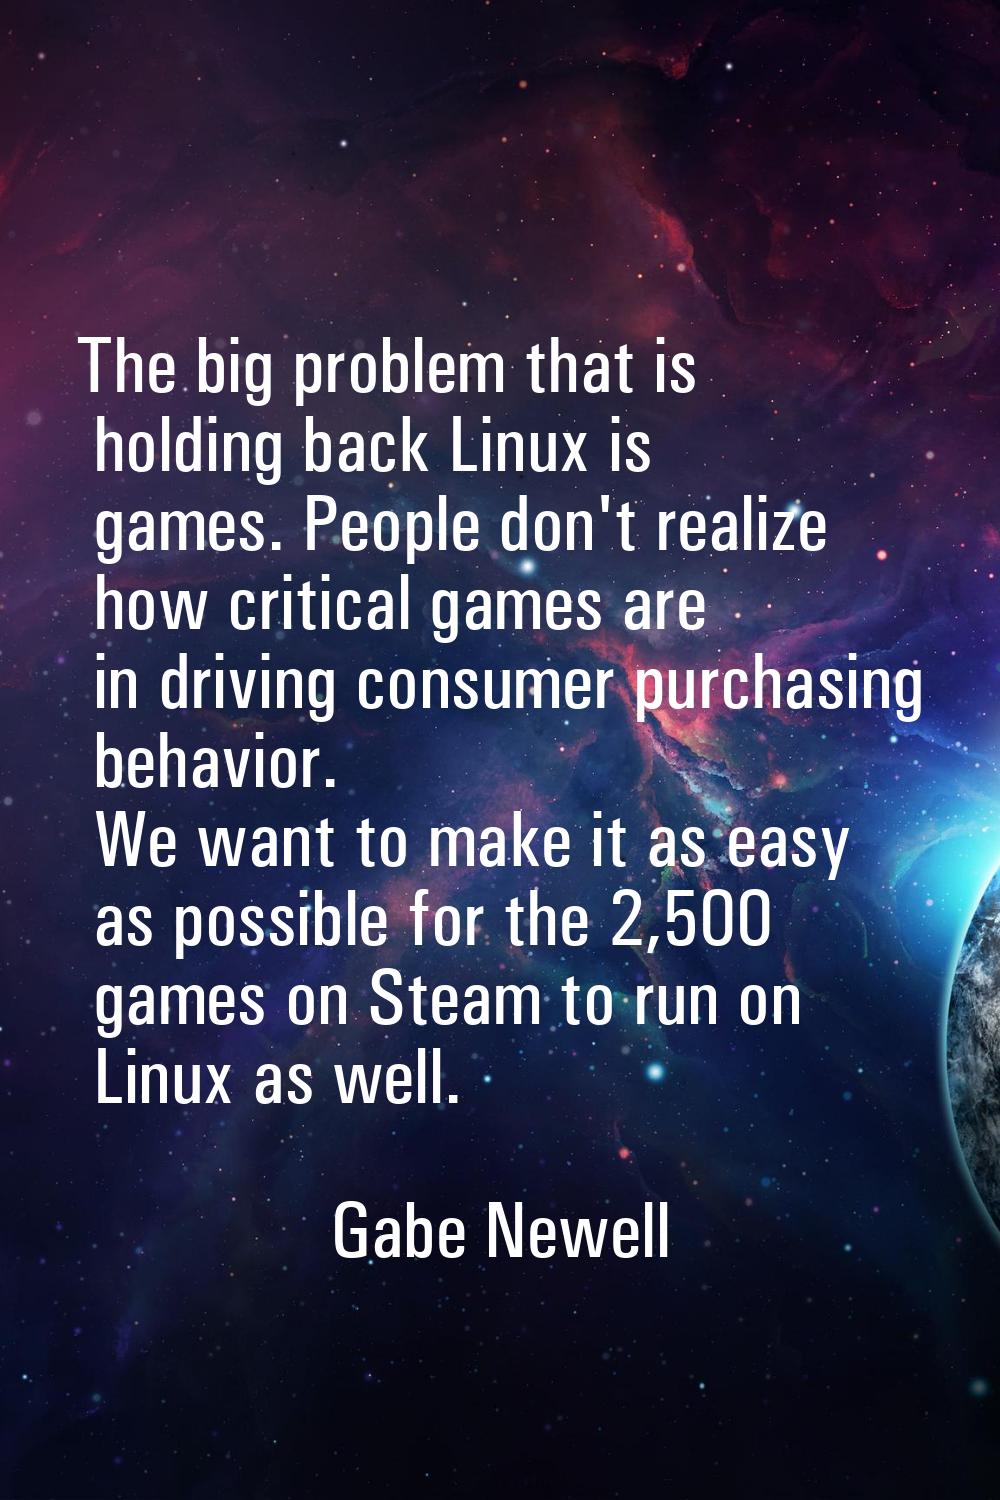 The big problem that is holding back Linux is games. People don't realize how critical games are in